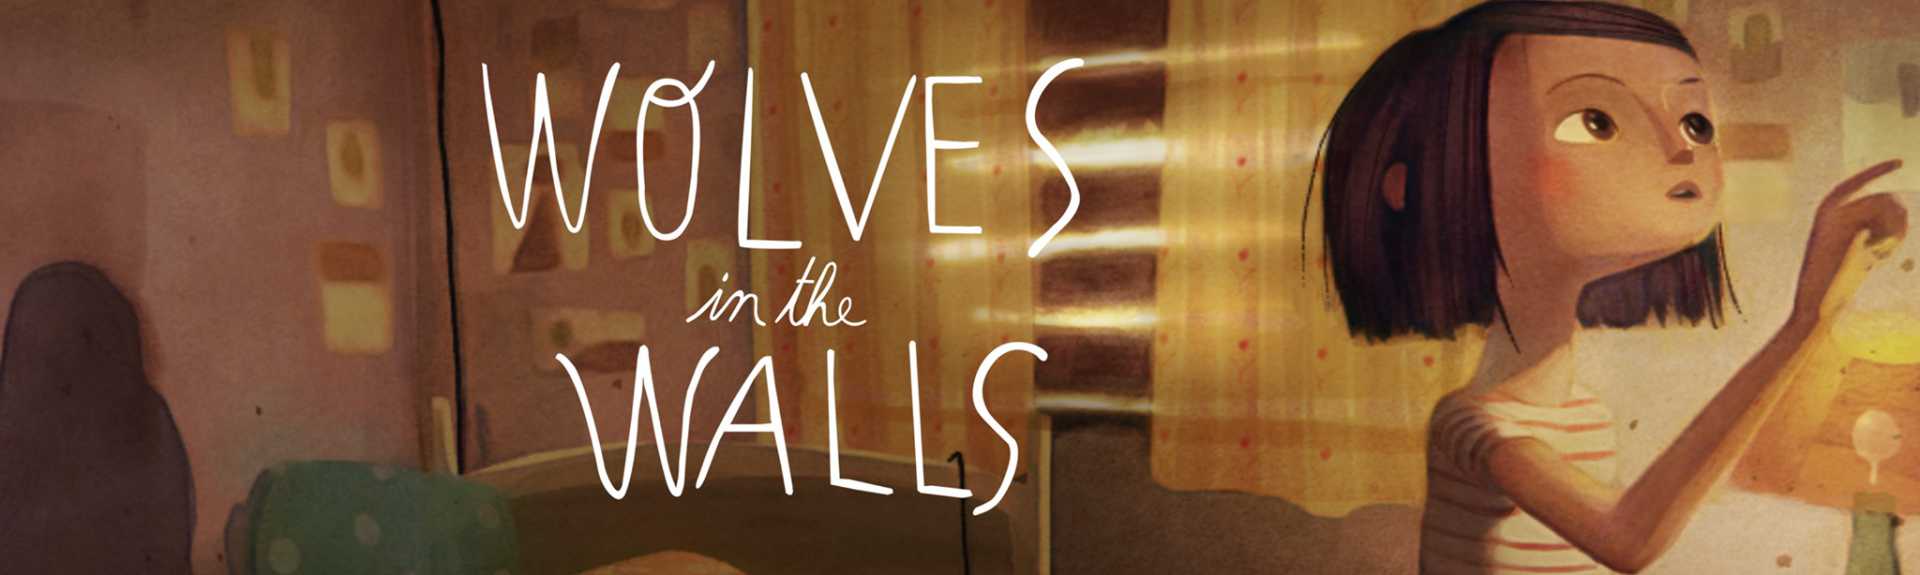 Wolves in the Walls: It's All Over